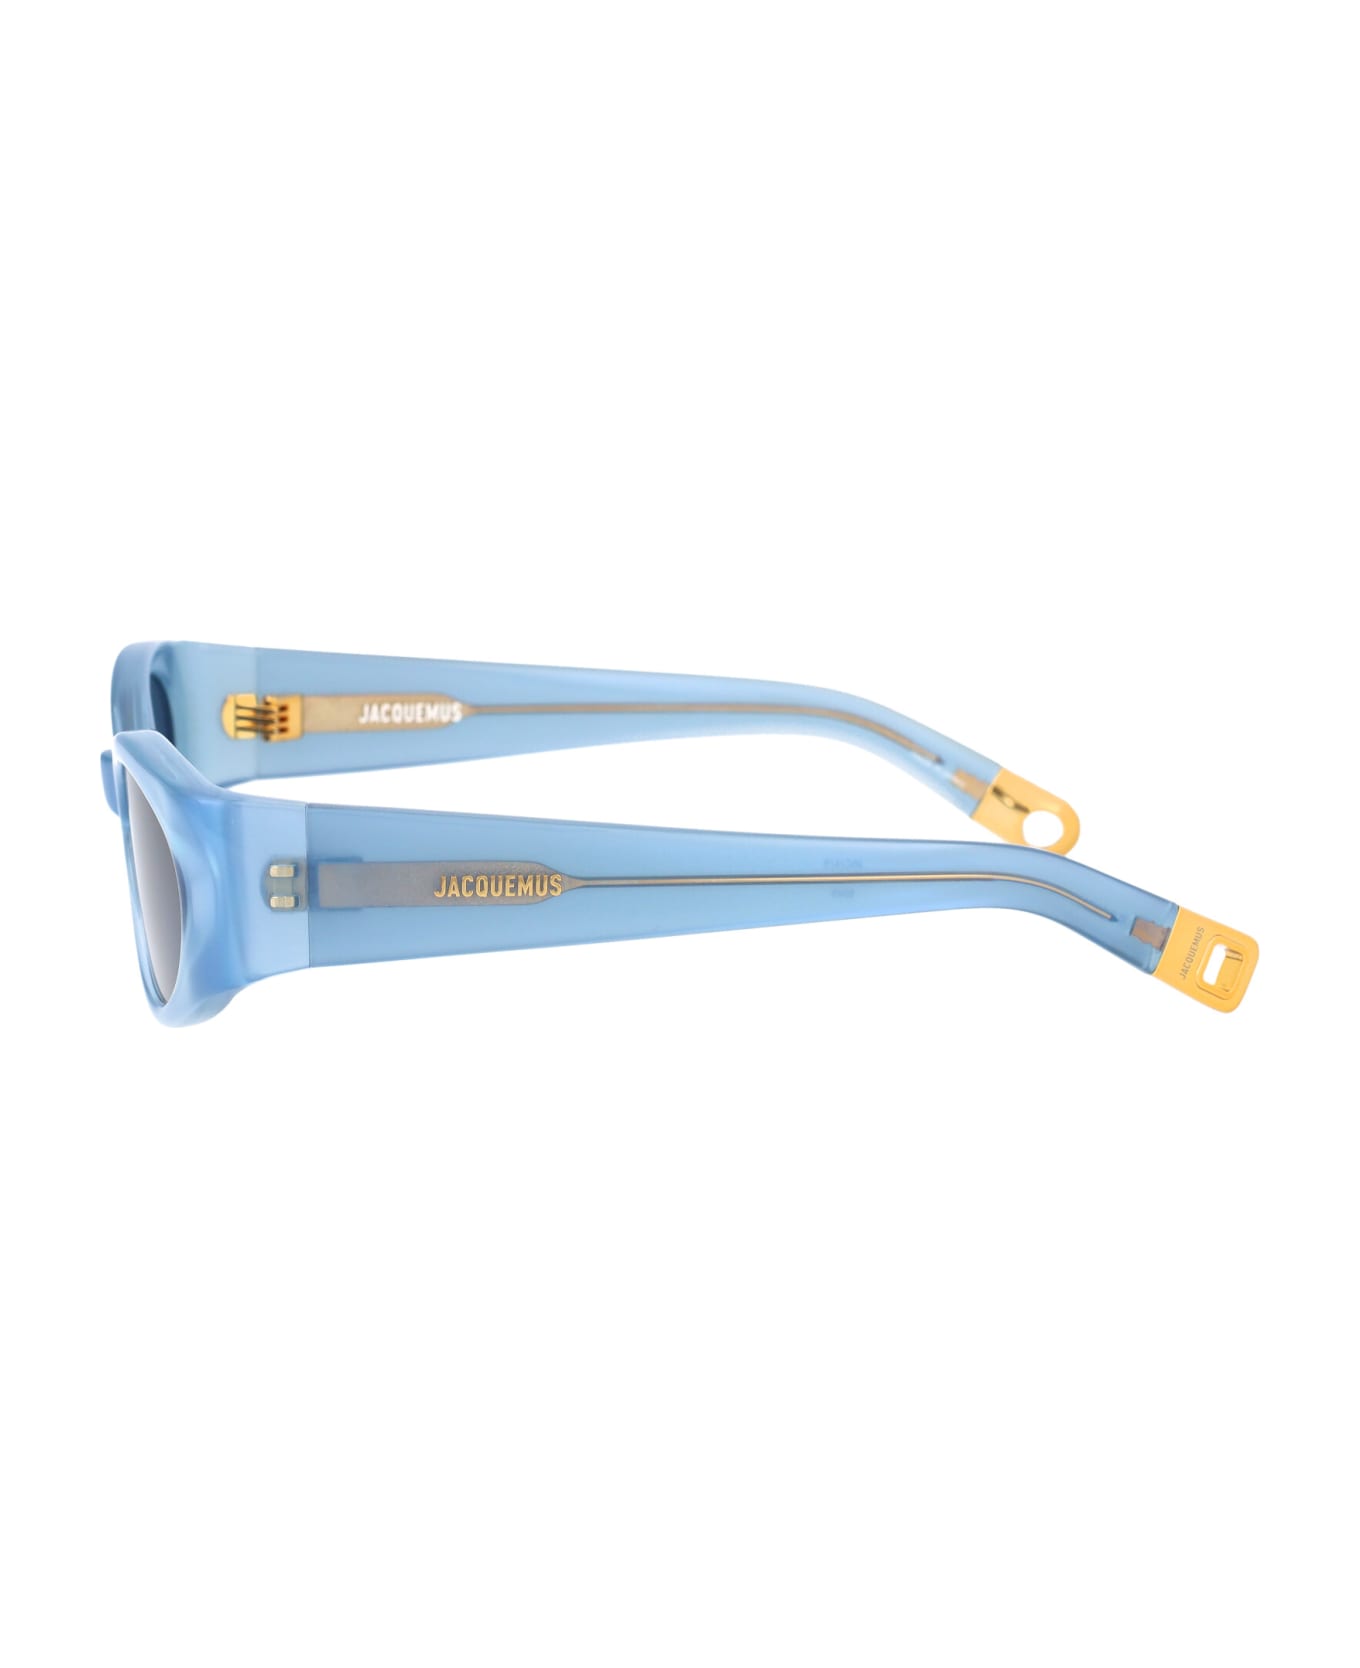 Jacquemus Ovalo Sunglasses - 05 BLUE PEARL/ YELLOW GOLD/ GREEN